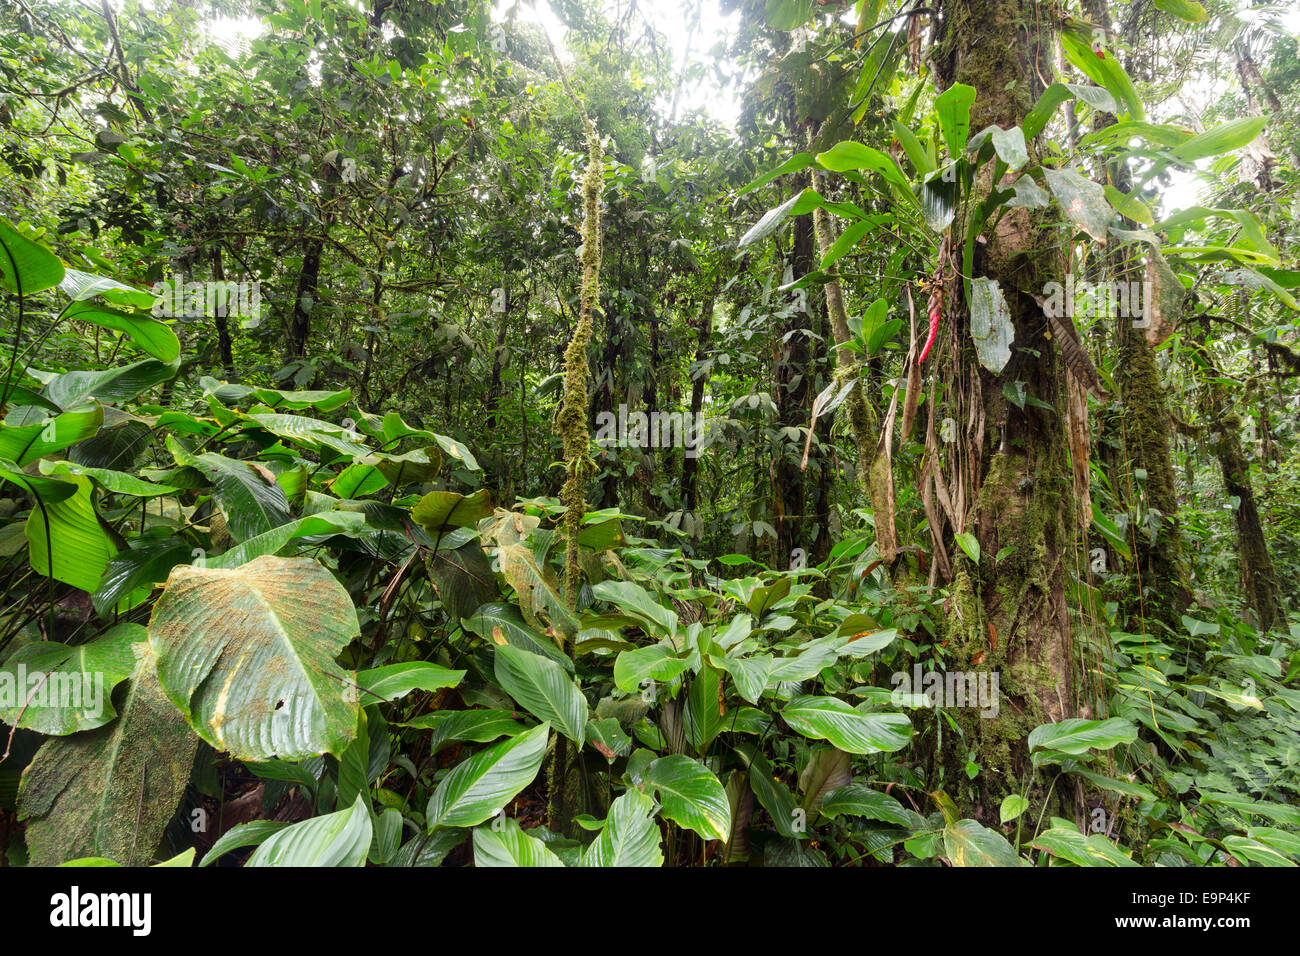 Interior of tropical rainforest near Sumaco National Park in the Ecuadorian Amazon with a Pitcairnia bromeliad in flower and Cal Stock Photo